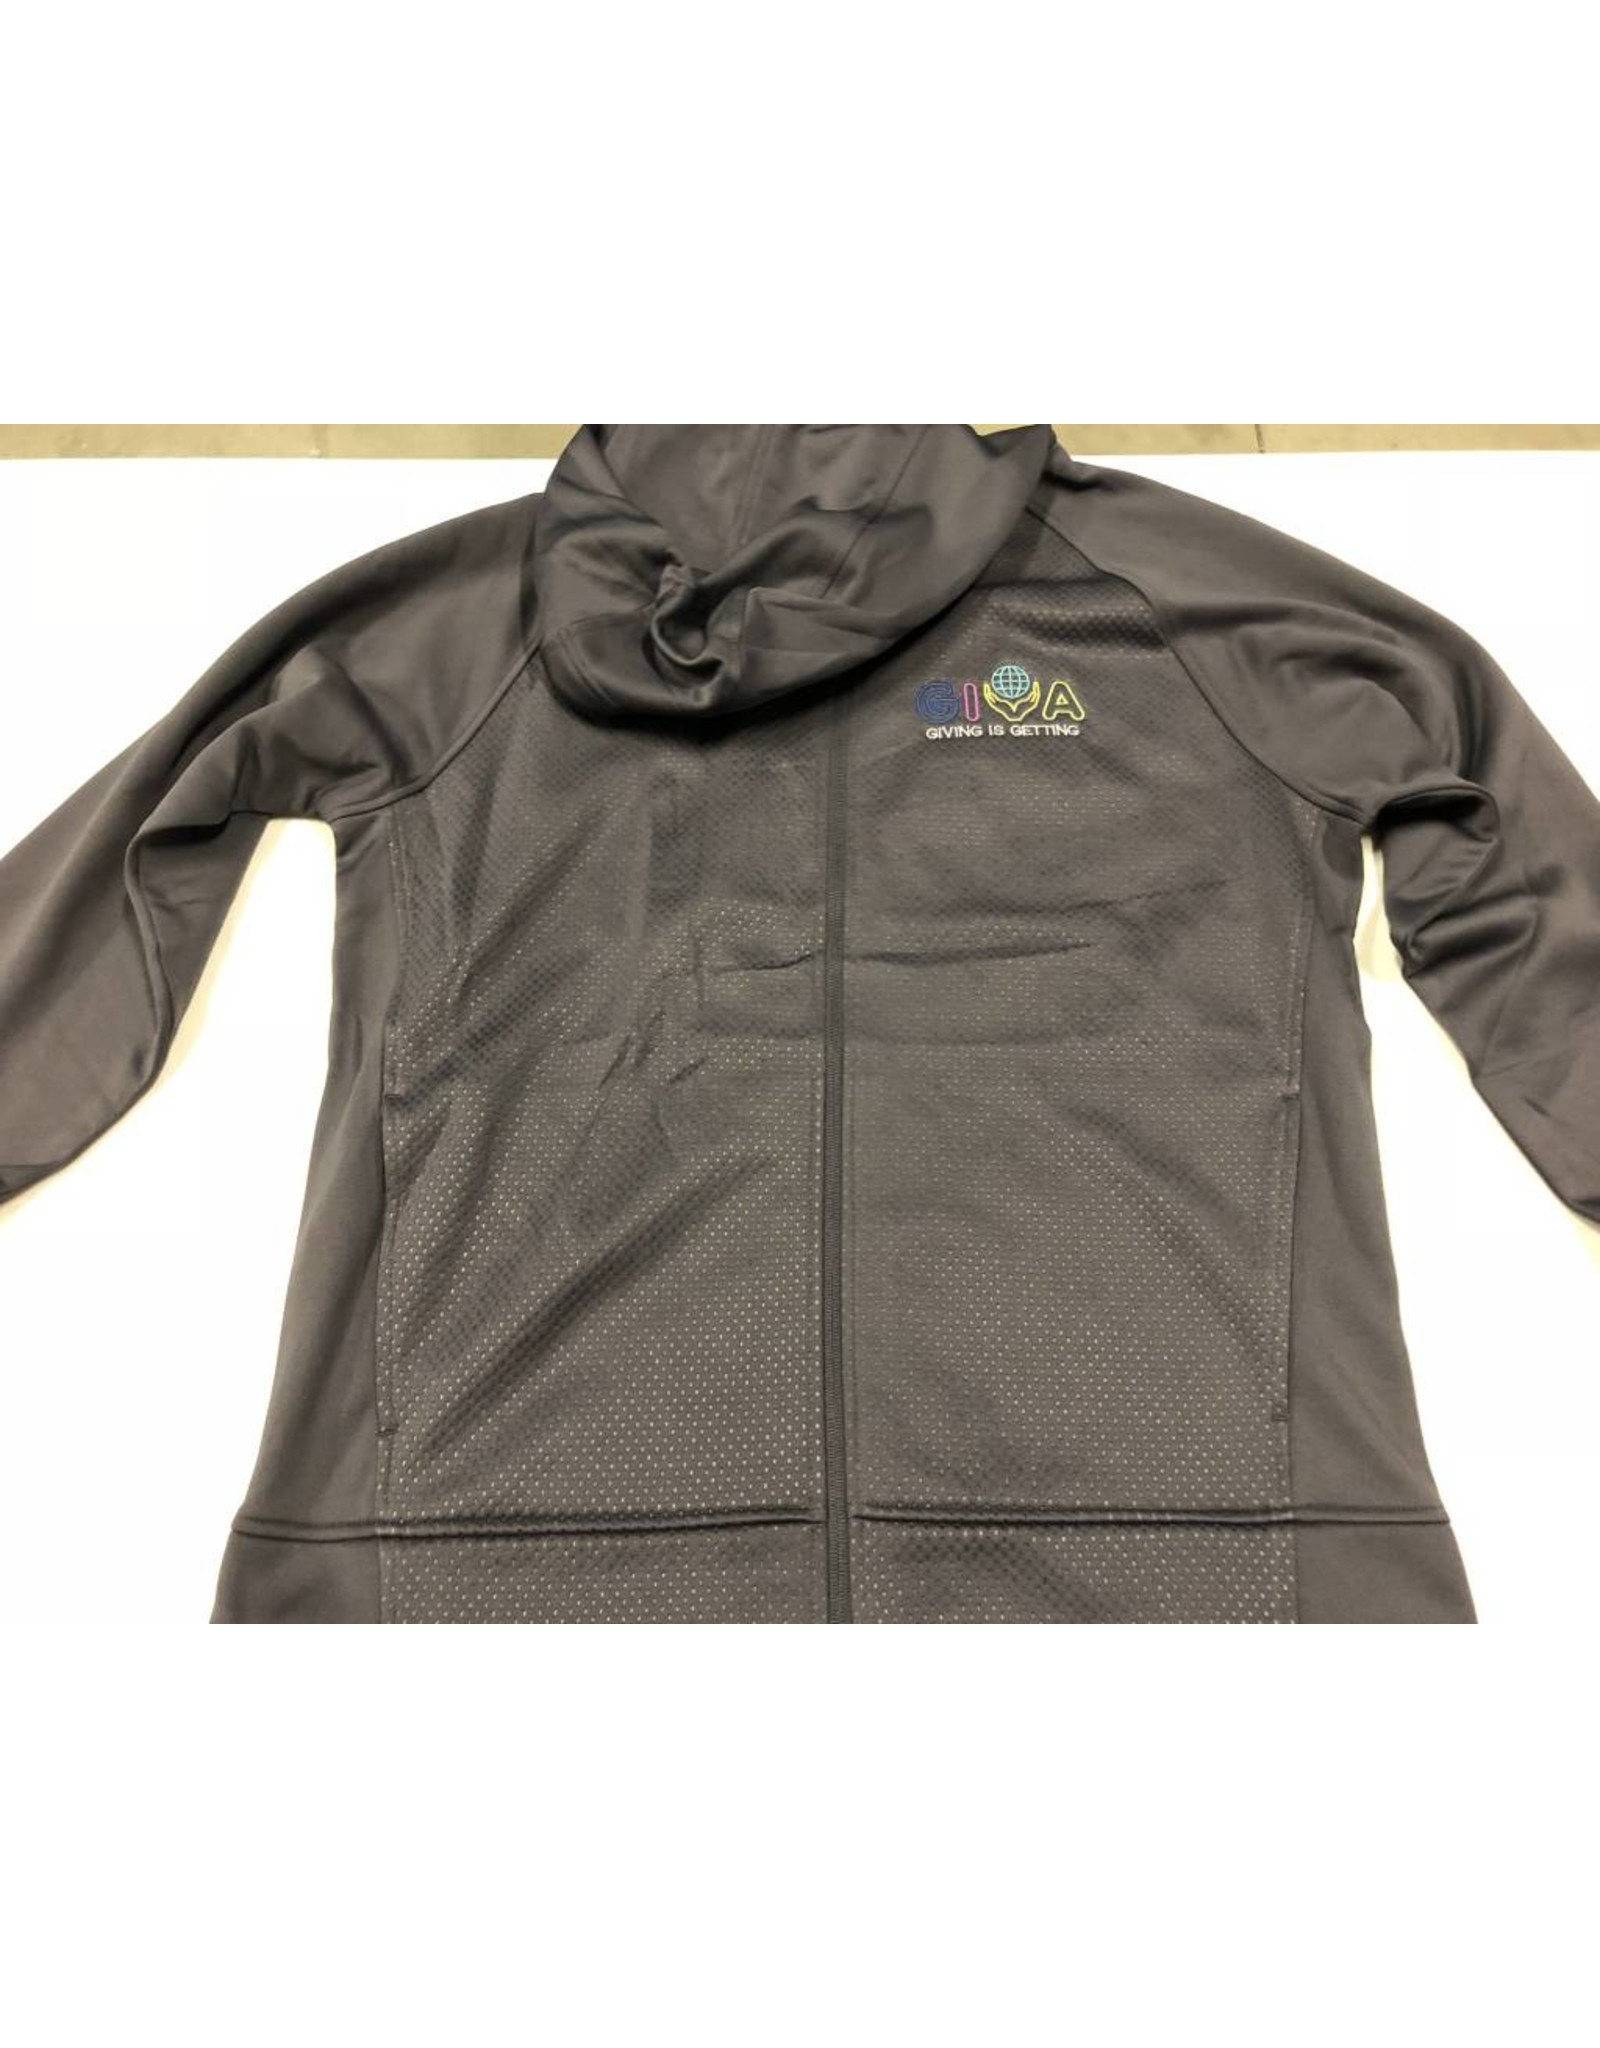 ST295 Full-Zip Hooded Jacket w/ Embroidery Left Chest